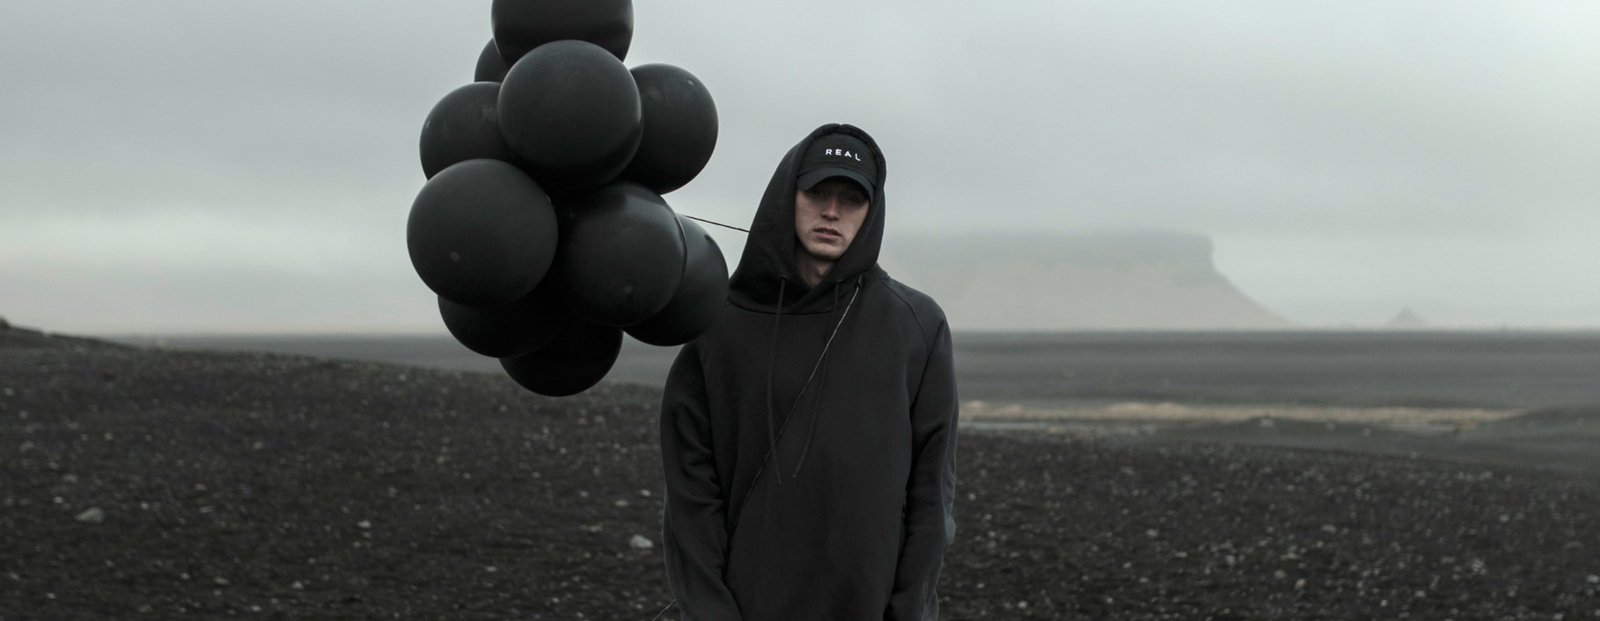 nf the search full album